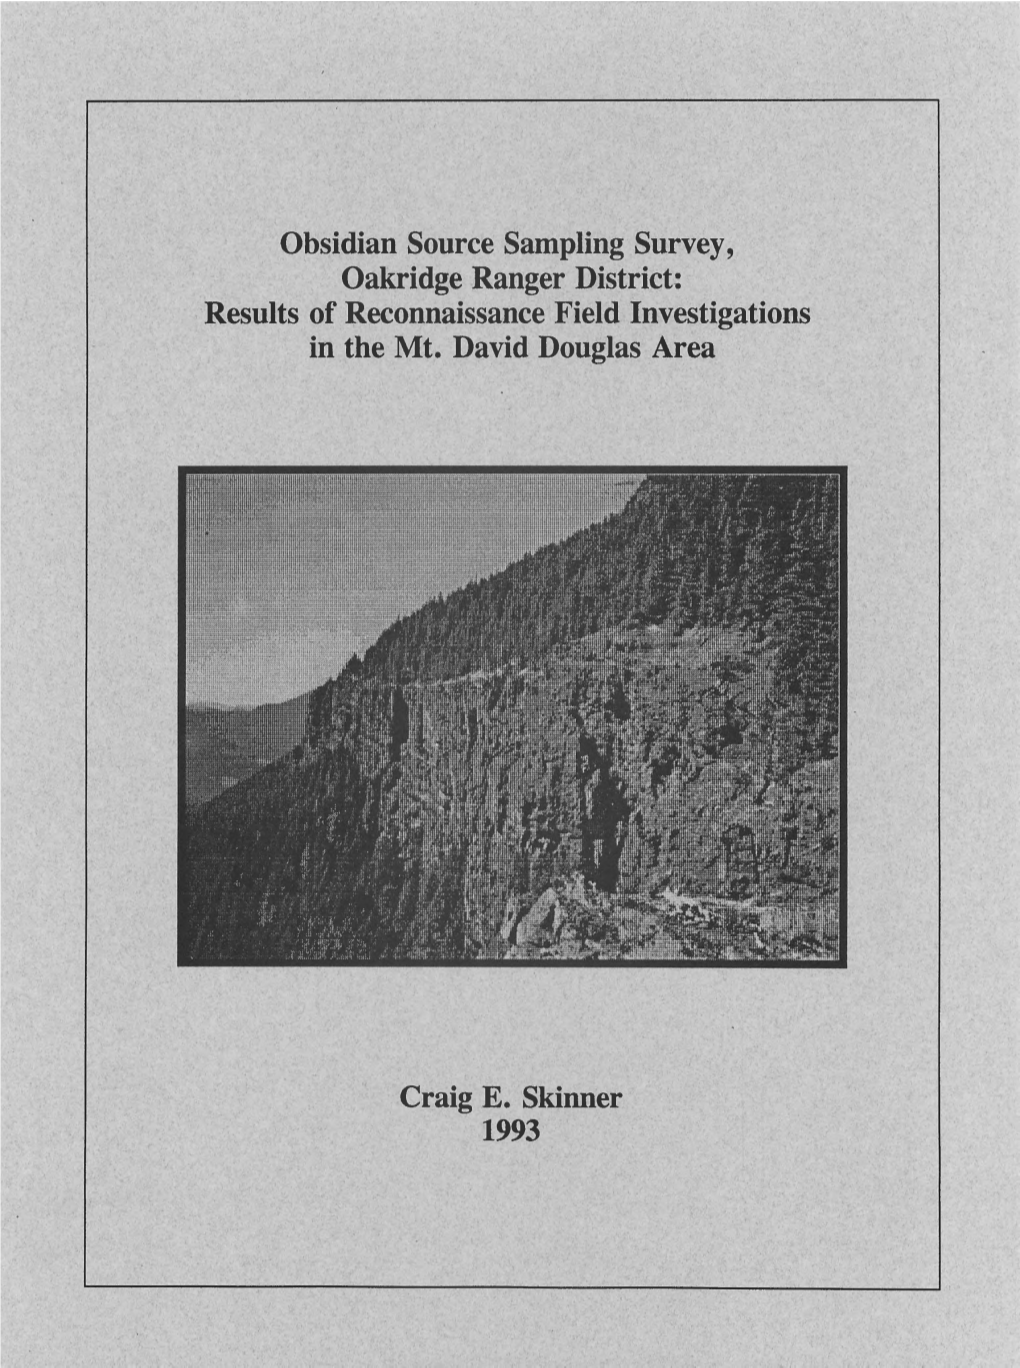 Obsidian Source Sampling Survey, Oakridge Ranger District: Results of Reconnaissance Field Investigations in the Mt